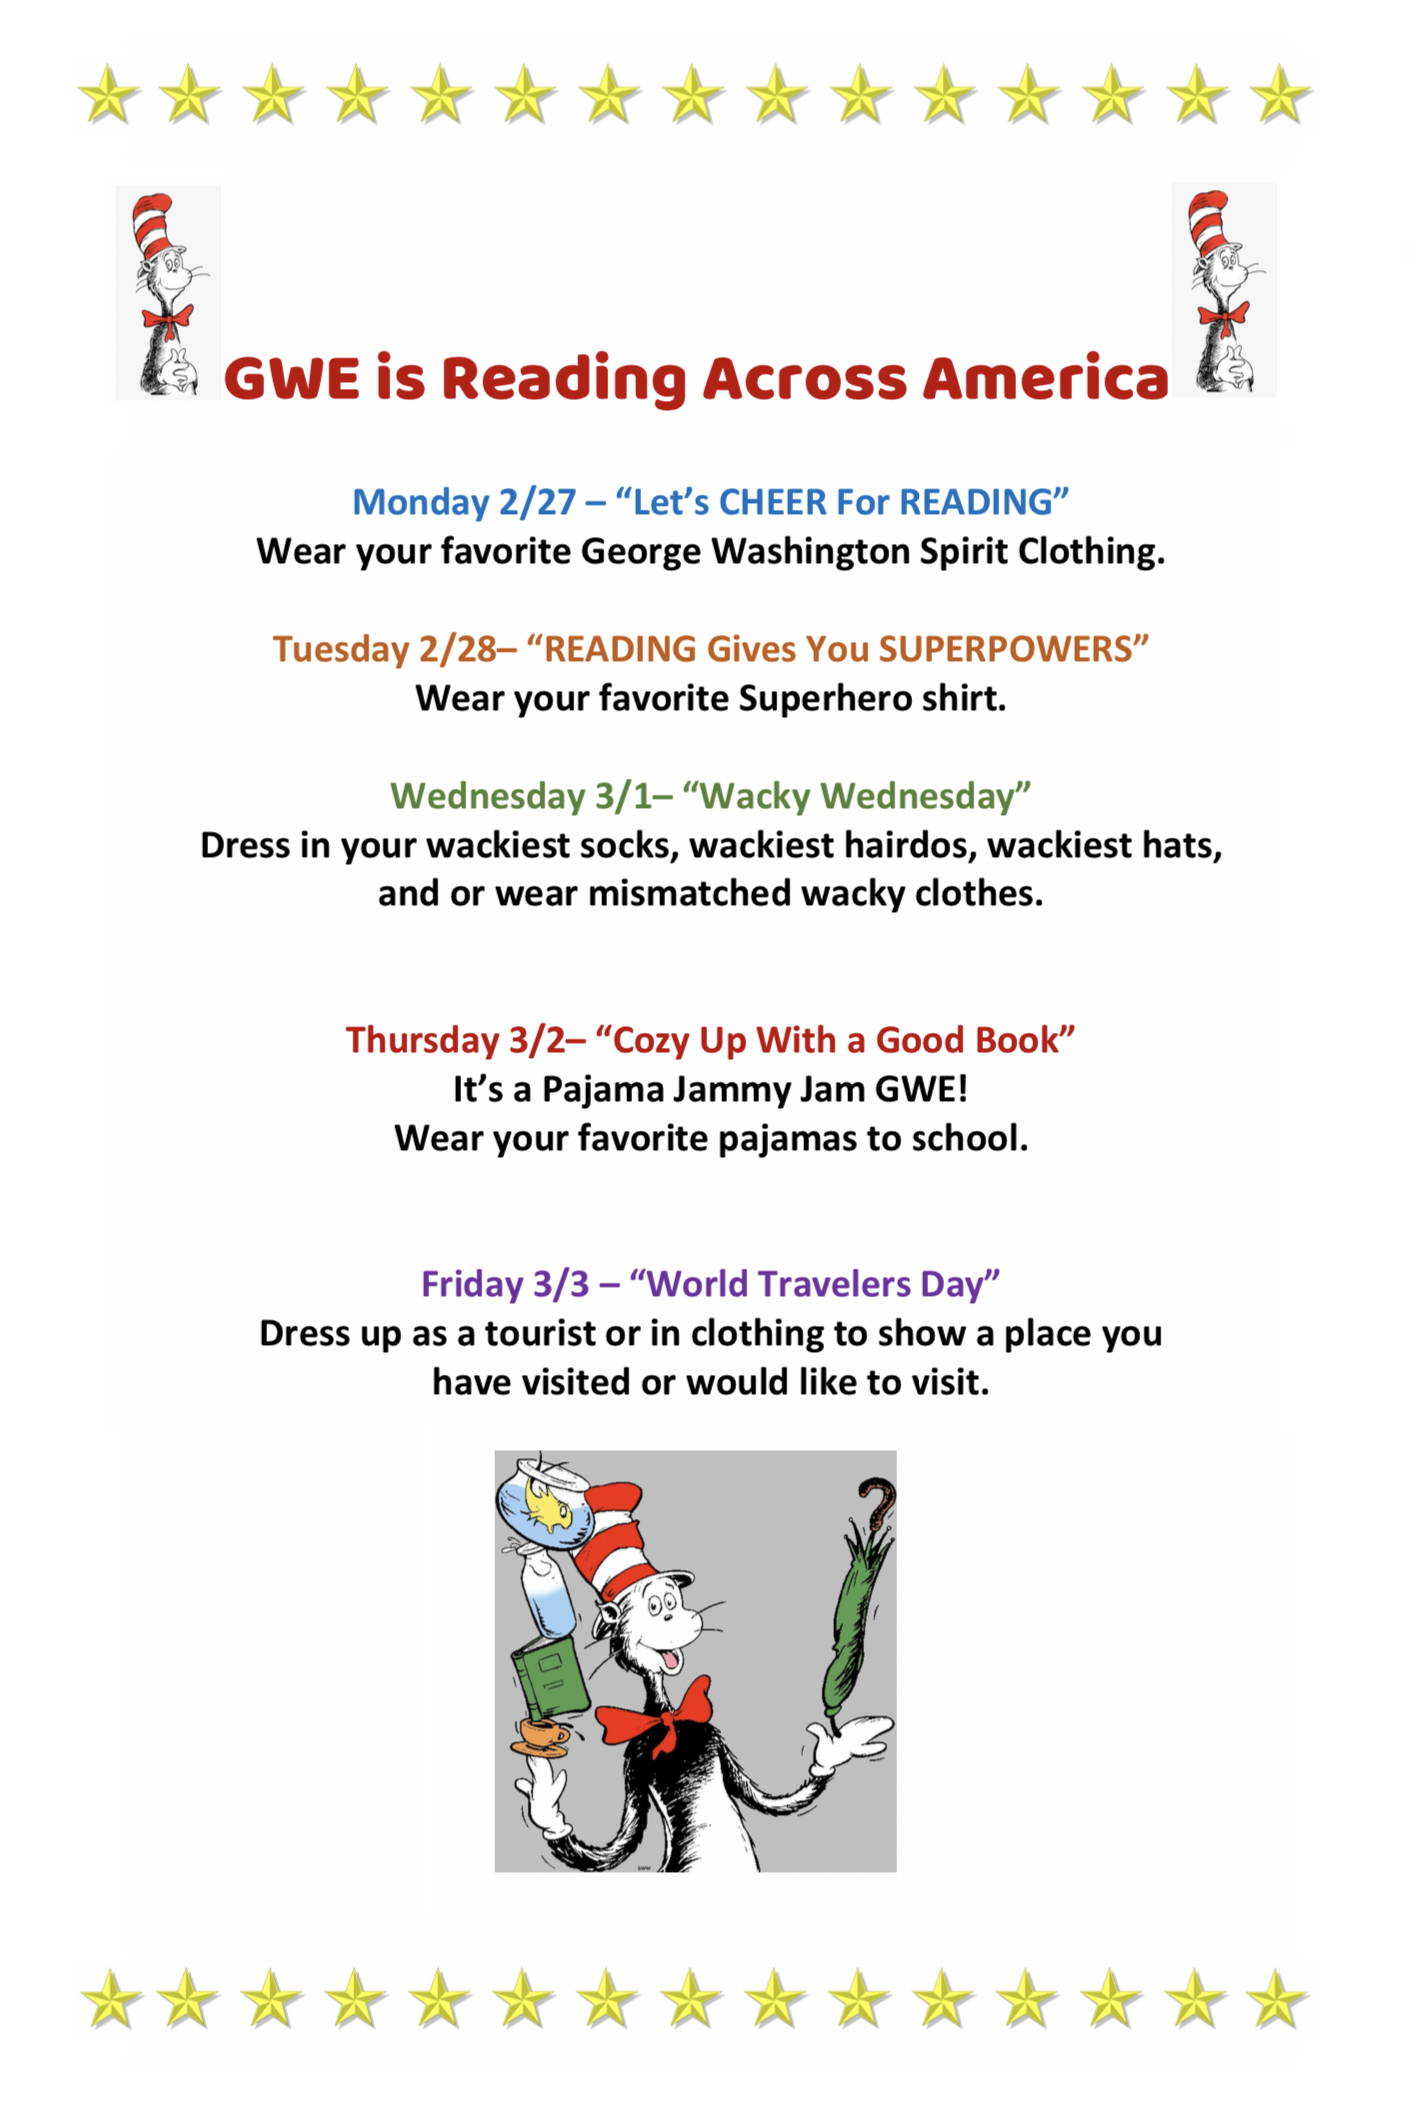 Read Across America is coming up at the Washington School